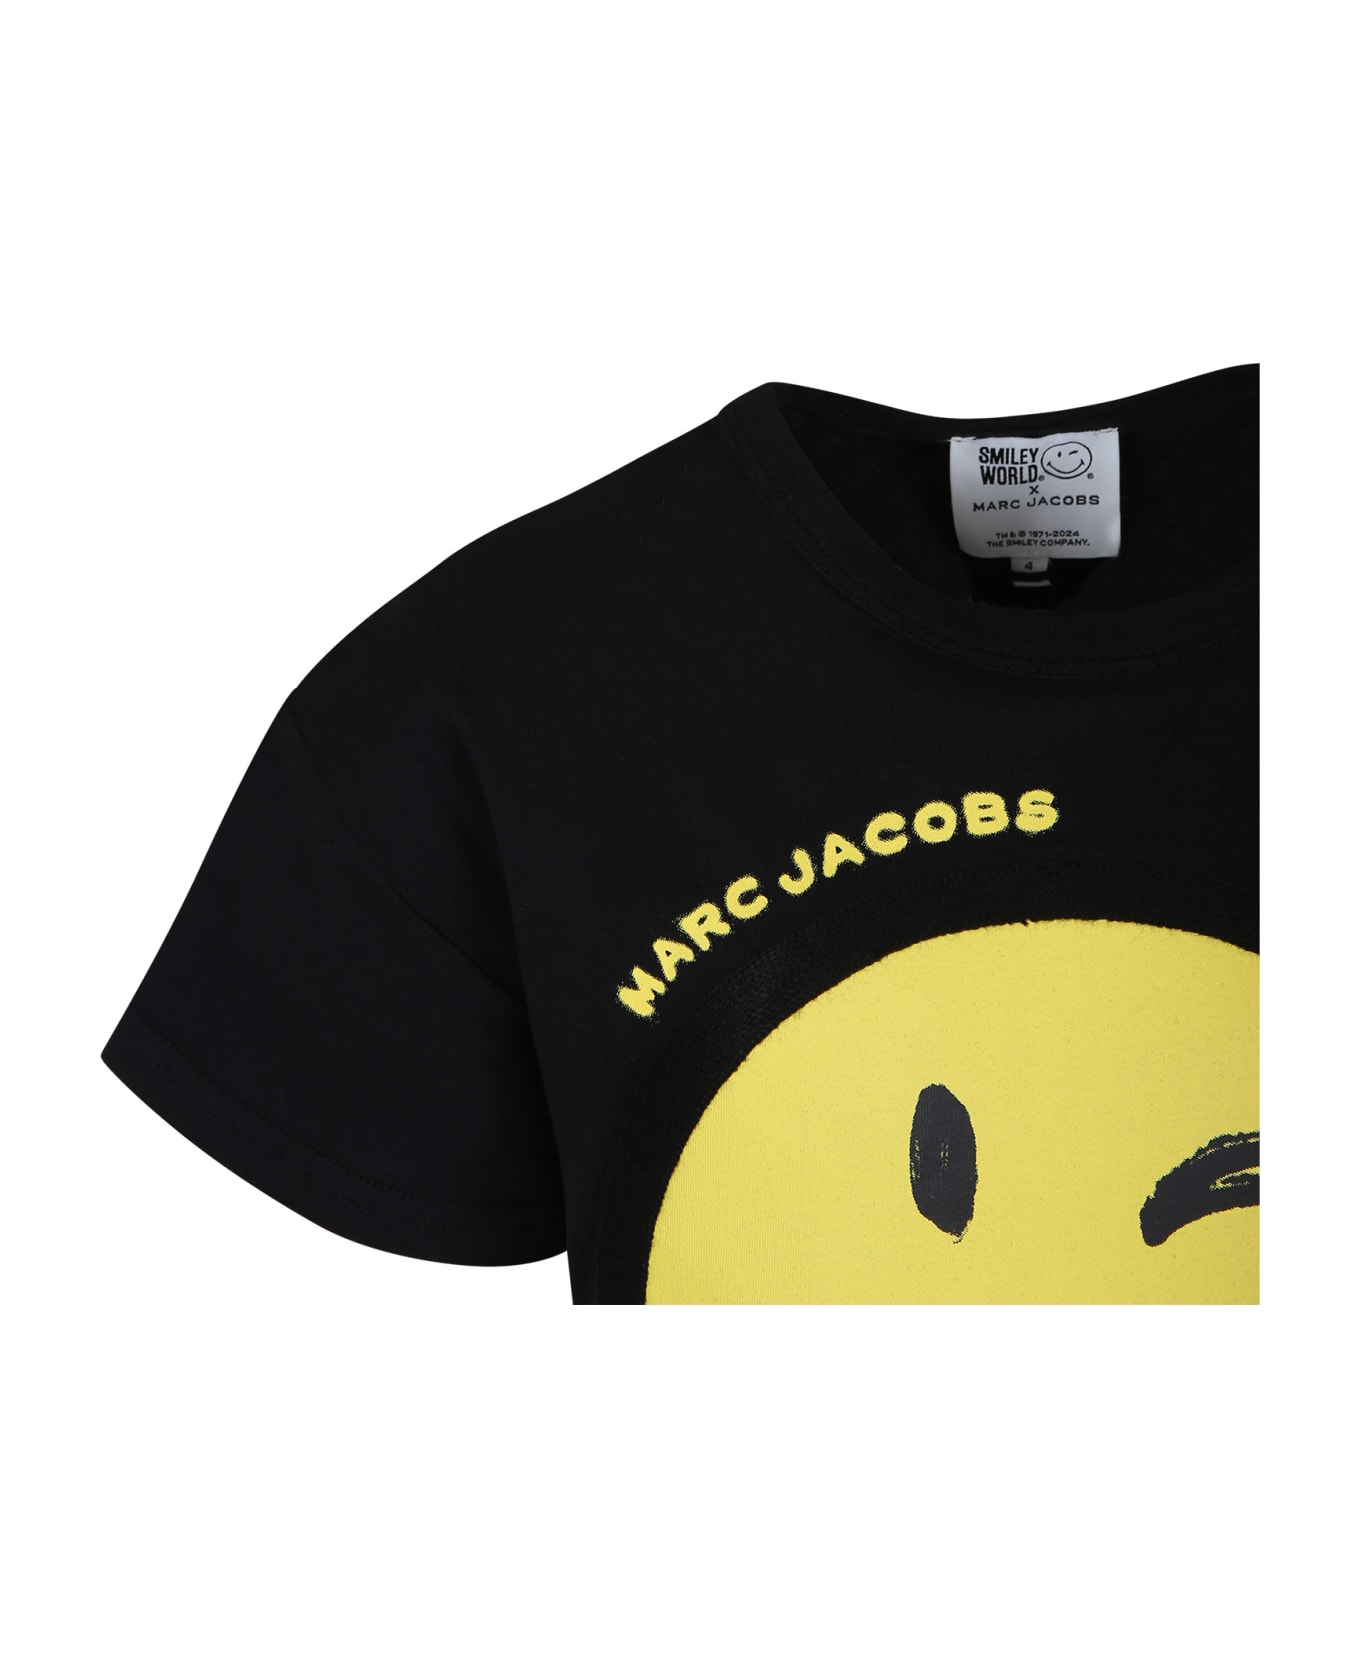 Marc Jacobs Black T-shirt For Girl With Smiley And Logo - Nero